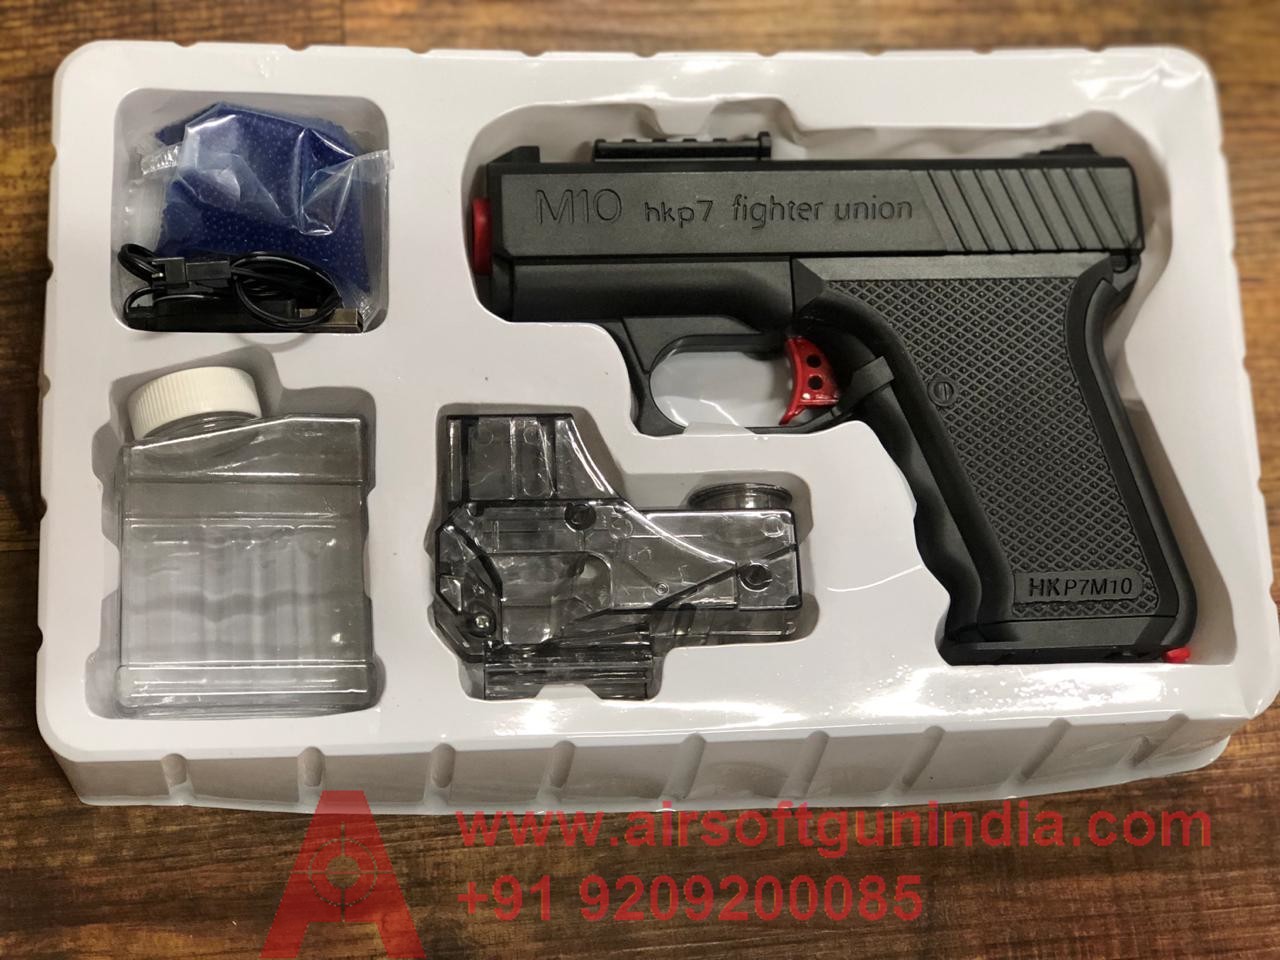 Electric Automatic Gel Blaster Airsoft Pistol EBB Toy For Kids By Airsoft Gun India.